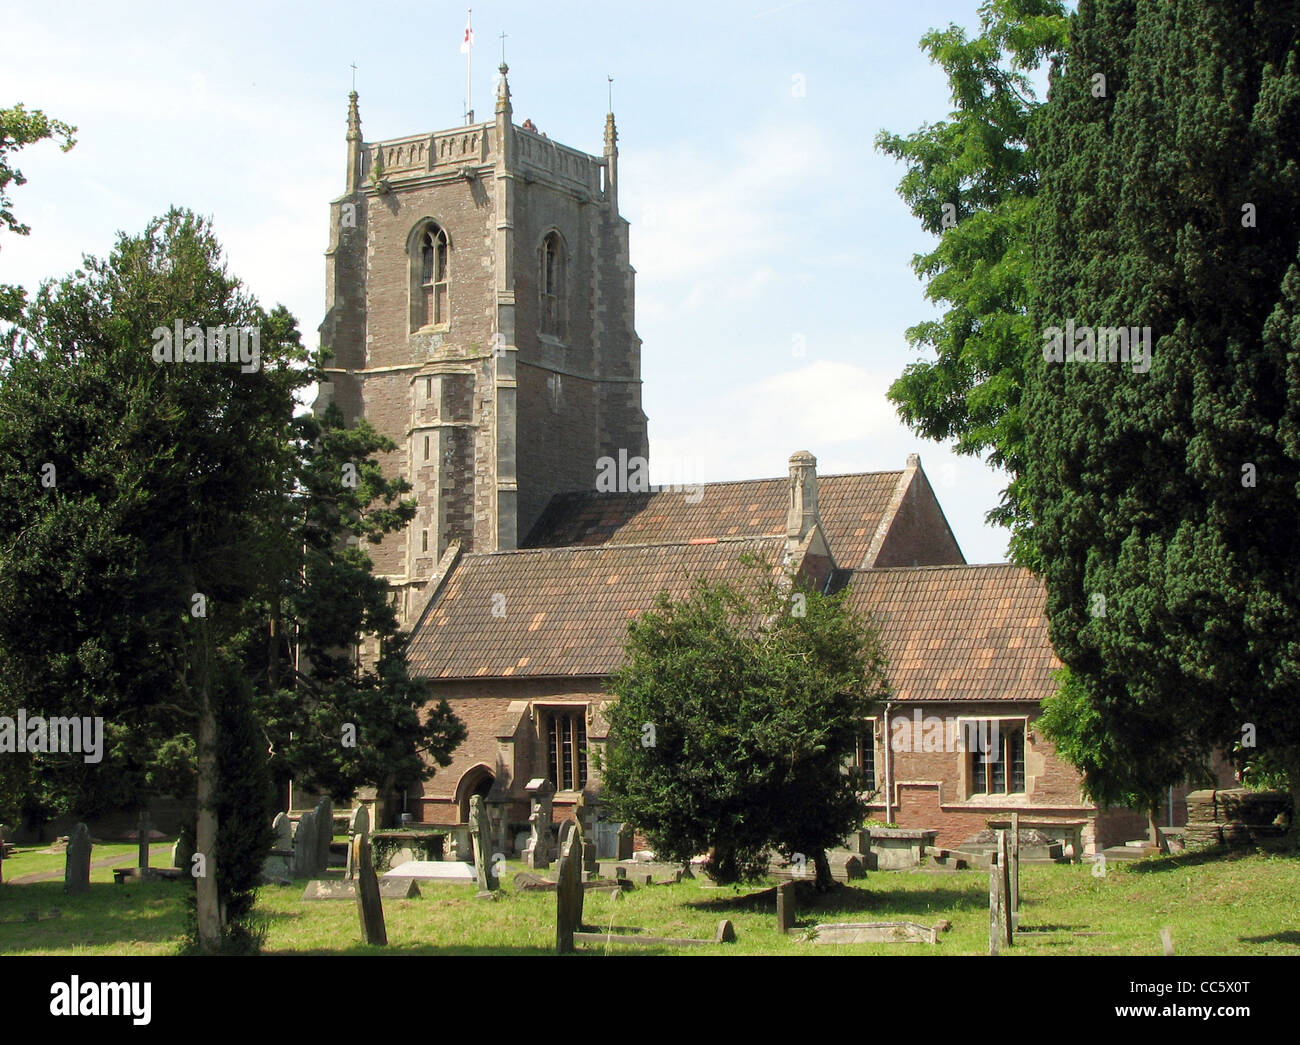 The church of St James the Less, Iron Acton, South Gloucestershire, England. Stock Photo